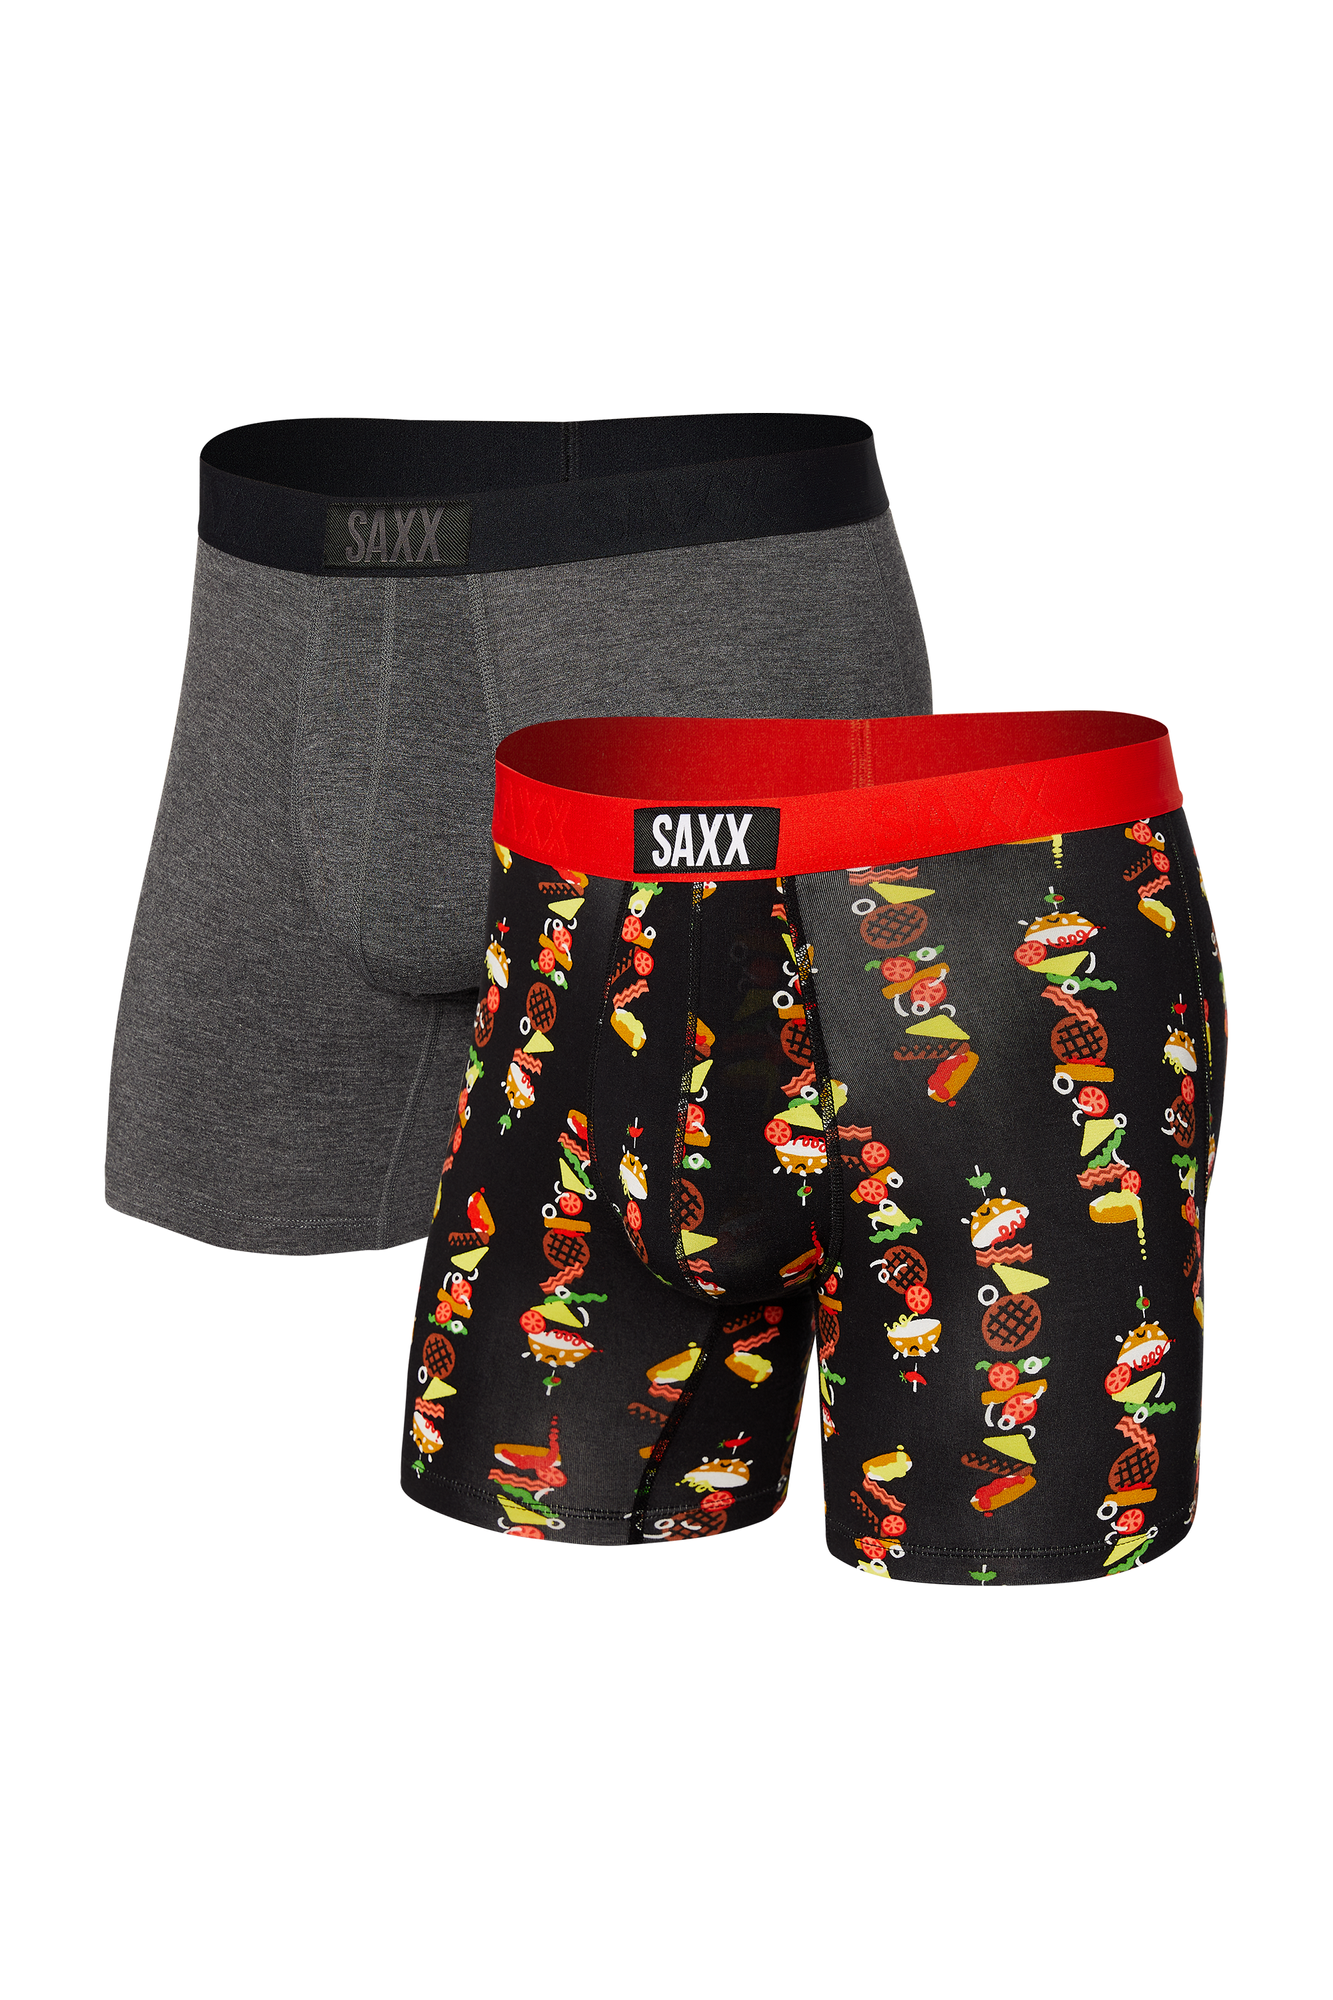 Saxx Vibe Boxer Brief Two Pack - Style SXPP2V SHH – Close To You